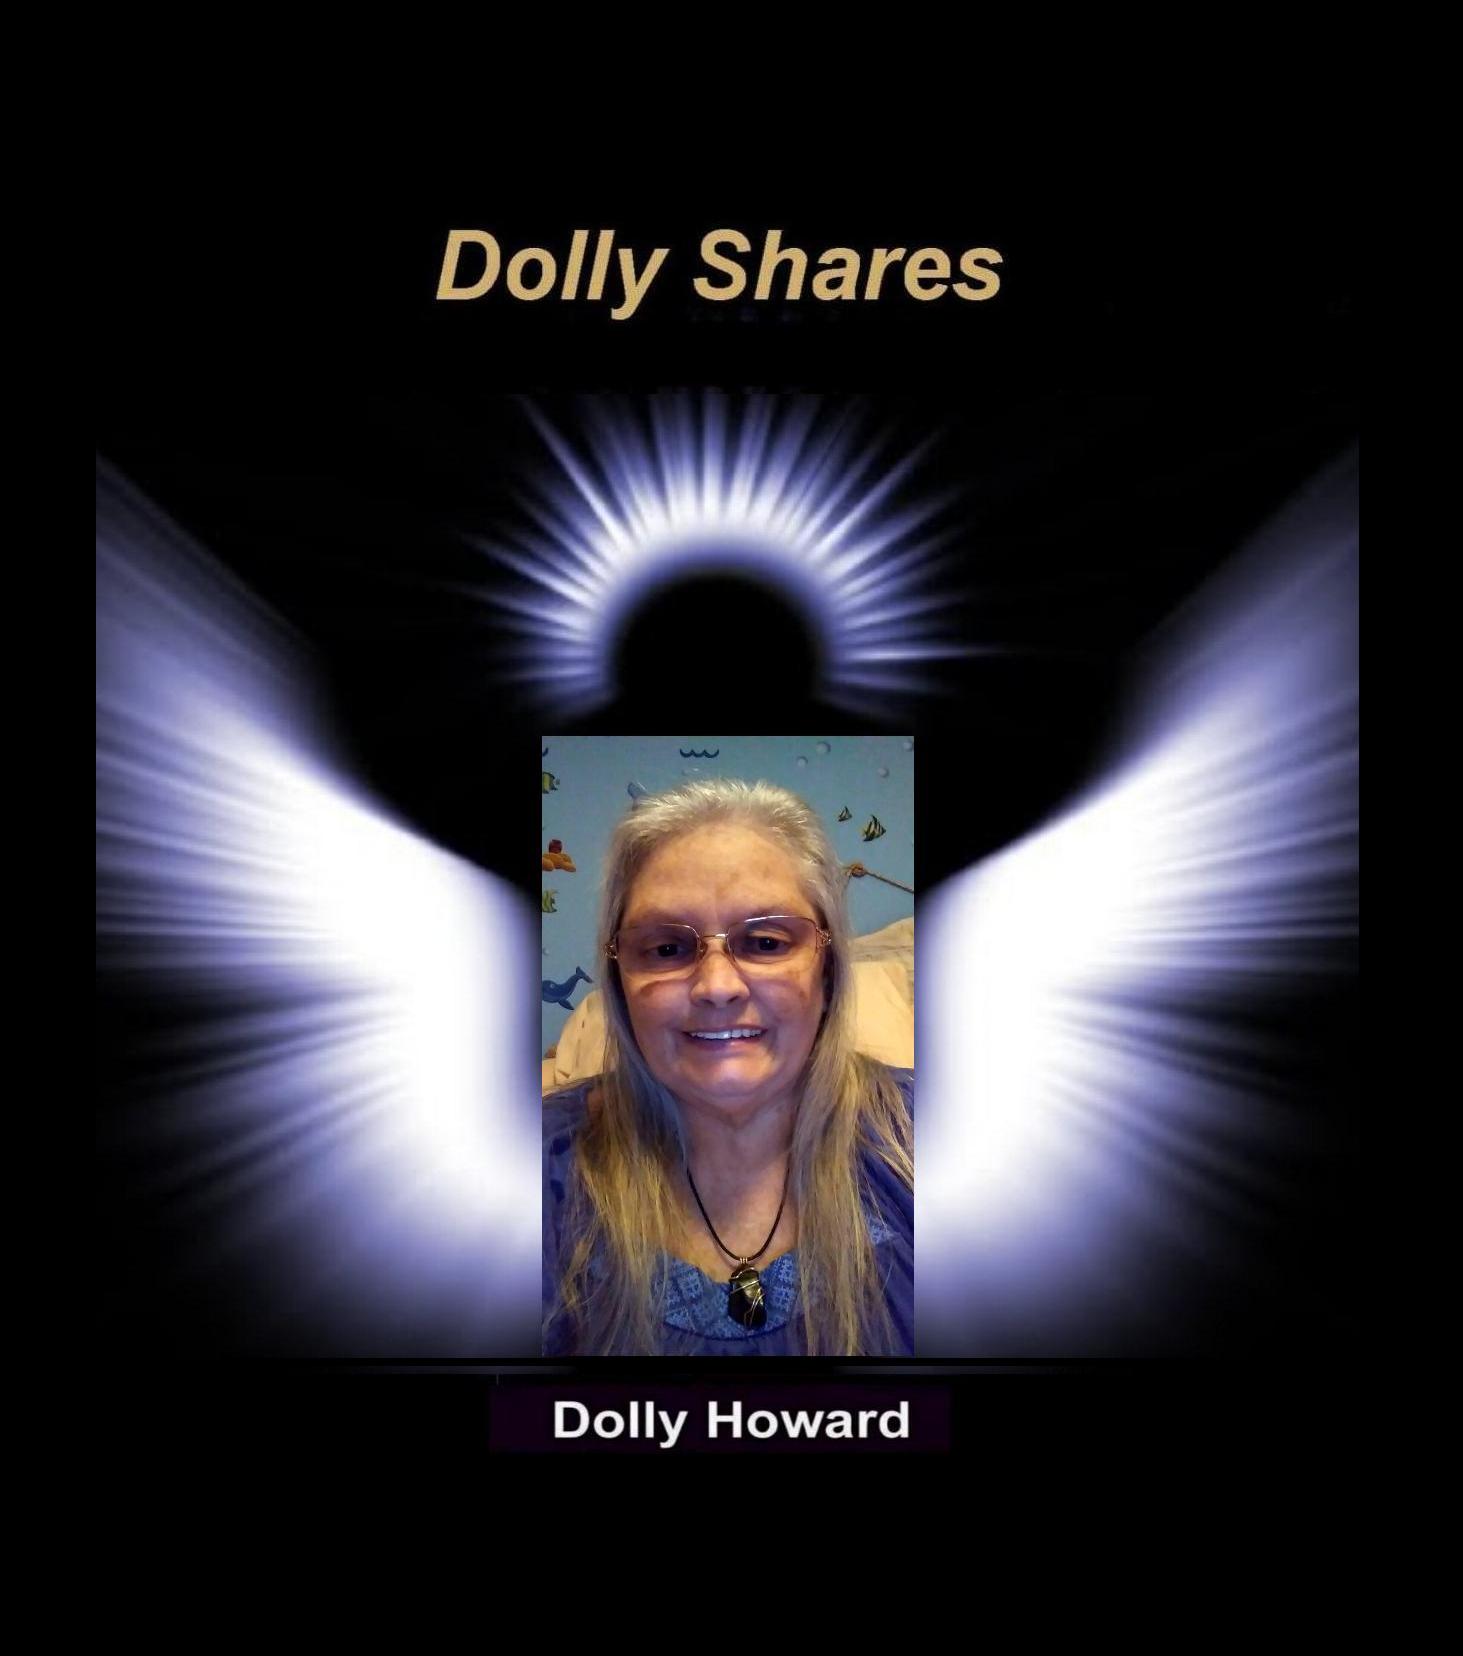 "DOLLY SHARES " with Dolly Howard – Observations From 4-8-2020